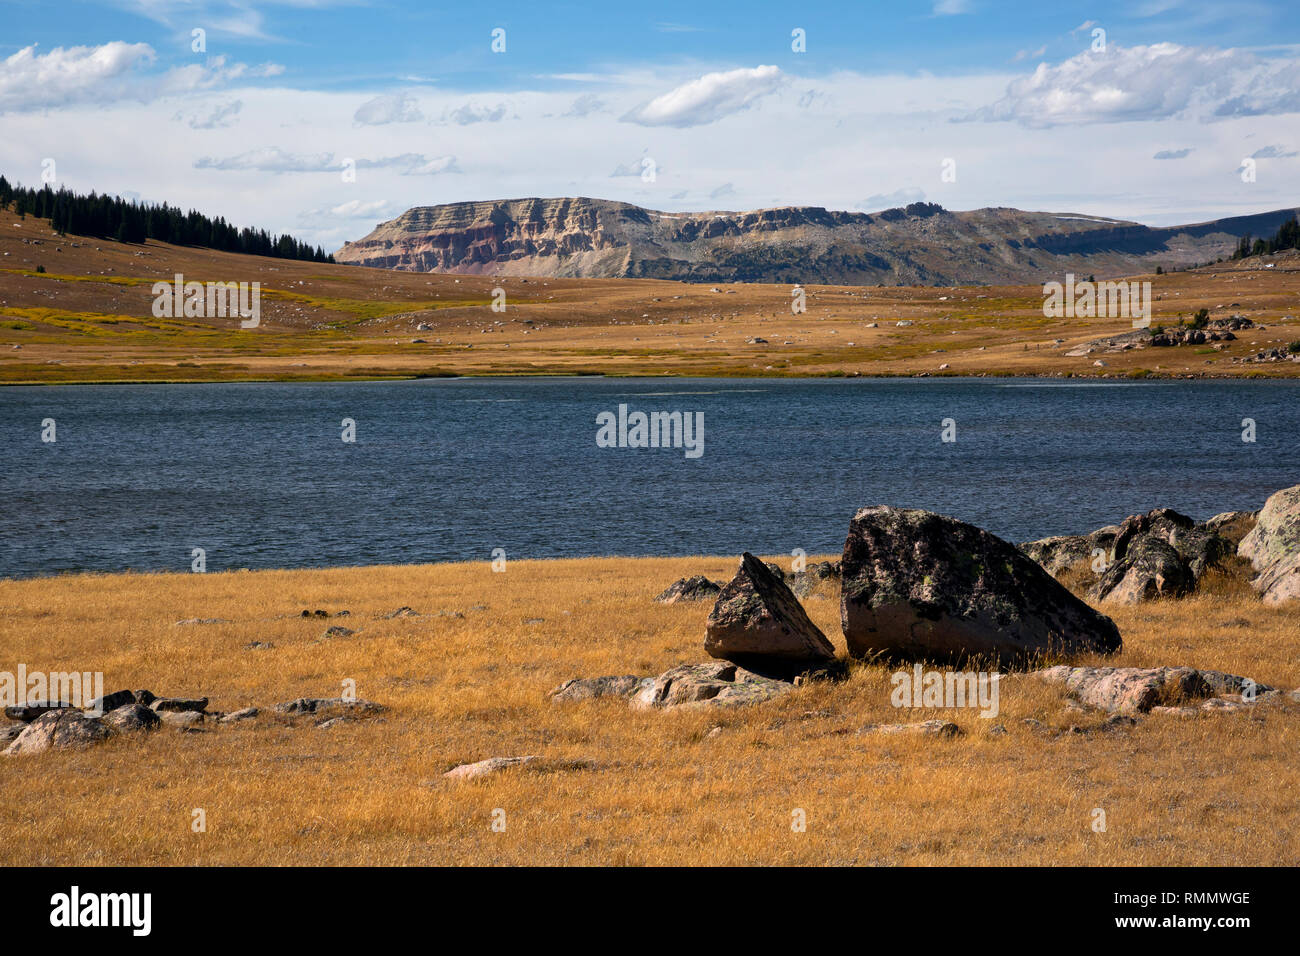 WY03739-00...WYOMING - One of the Chain Lakes located near the Beartooth Highway in the Shoshone National Forest. Stock Photo